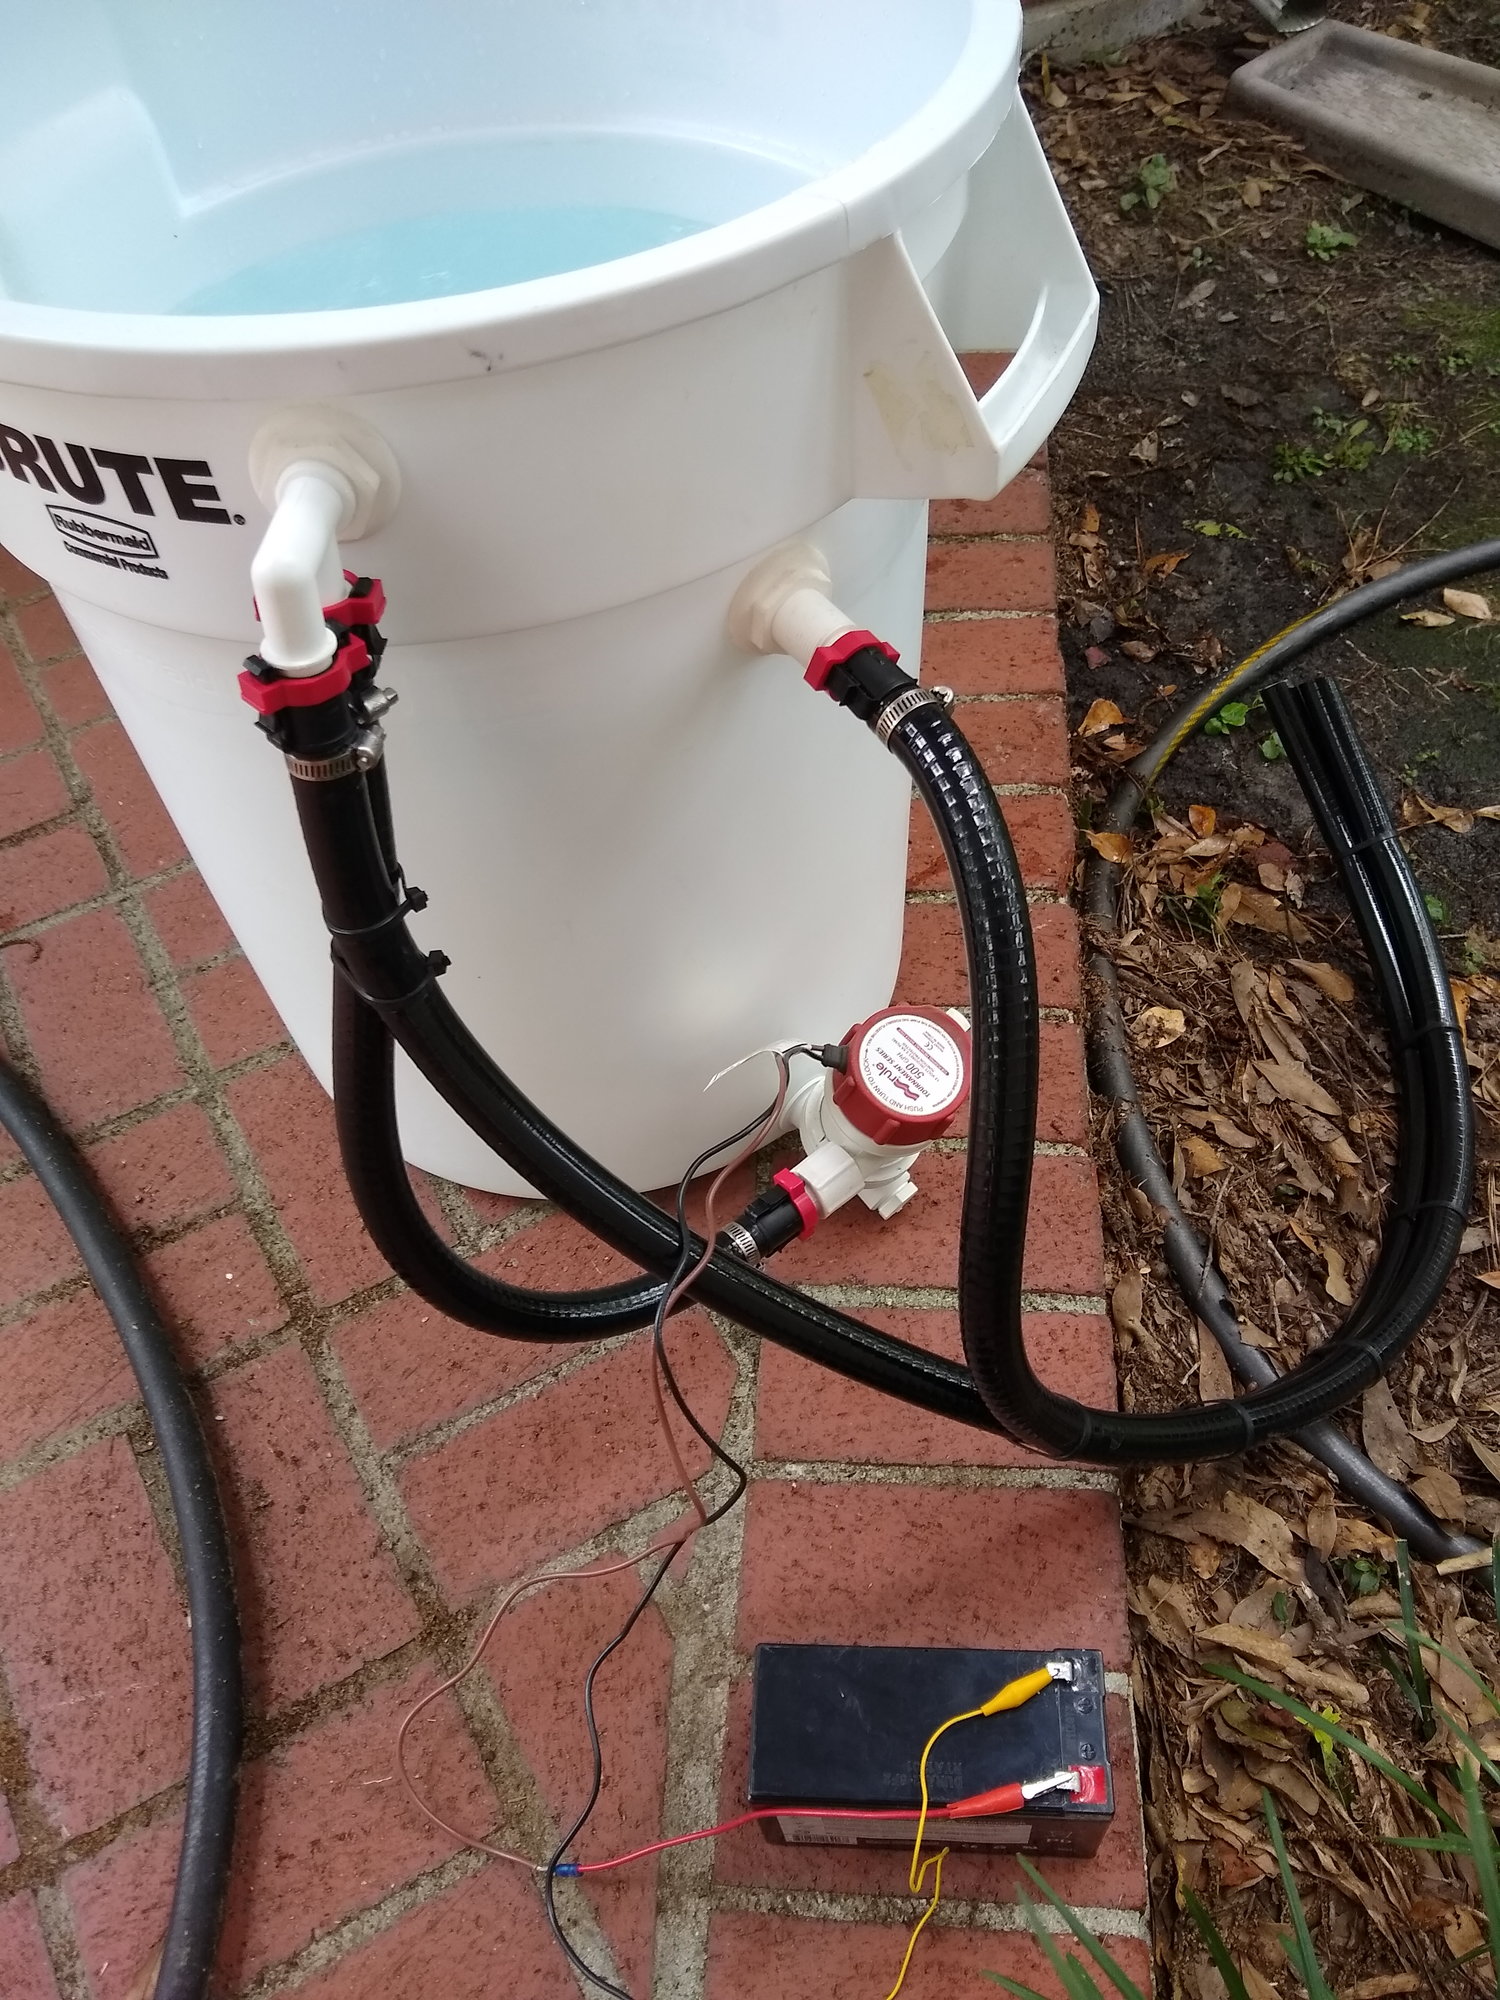 How to power 15 gallon bait tank - The Hull Truth - Boating and Fishing  Forum